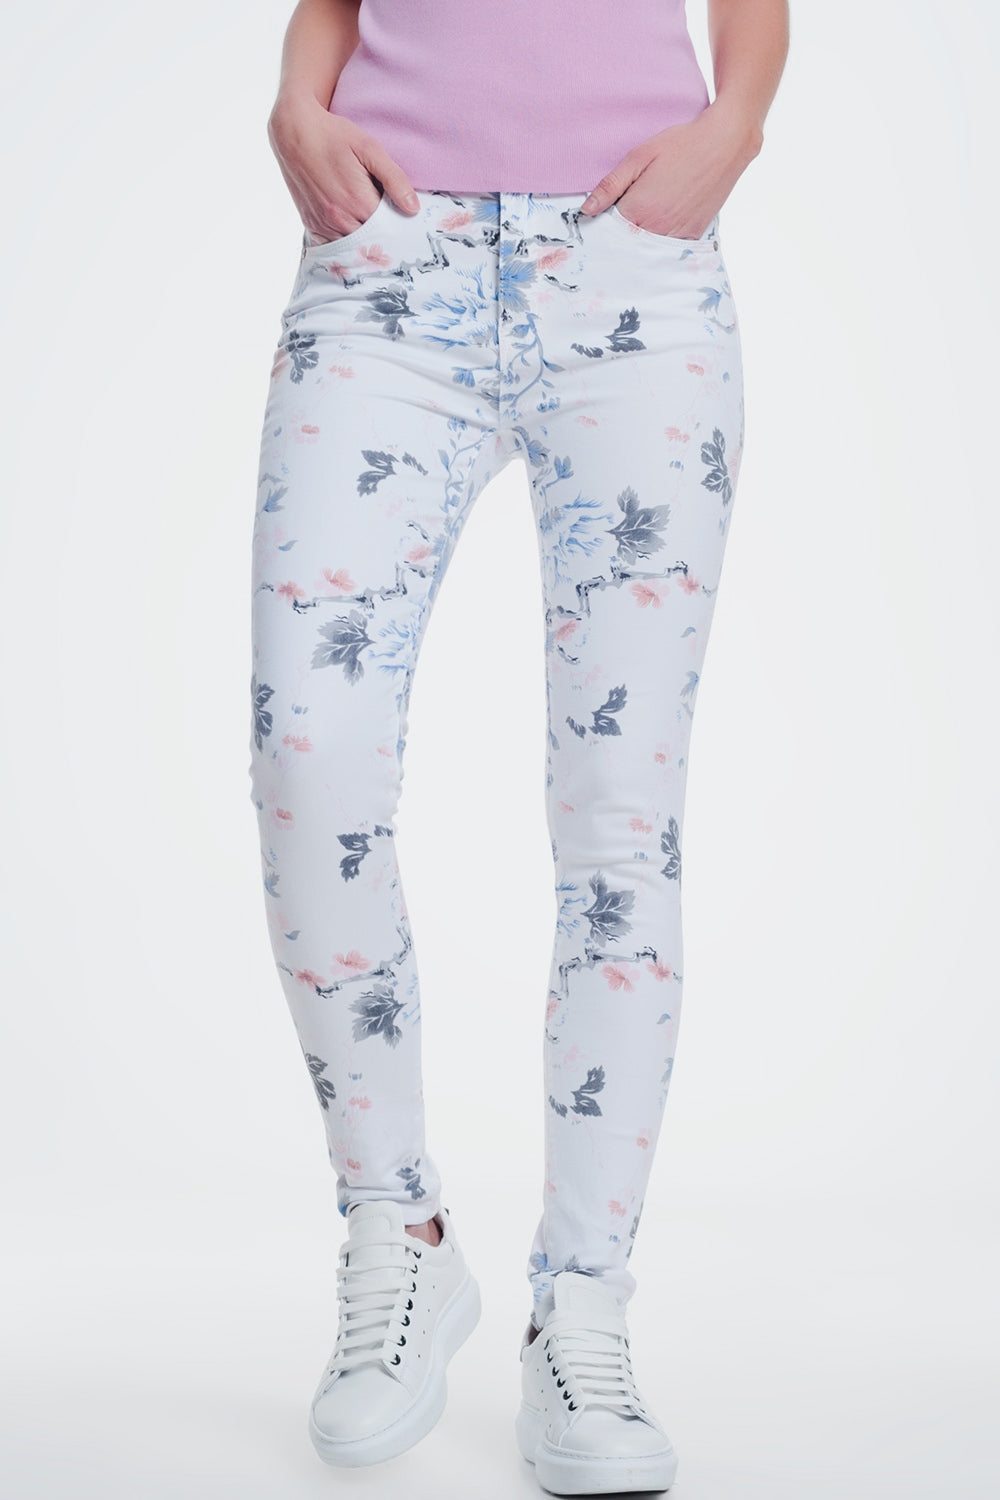 Q2 white skinny pants with floral print